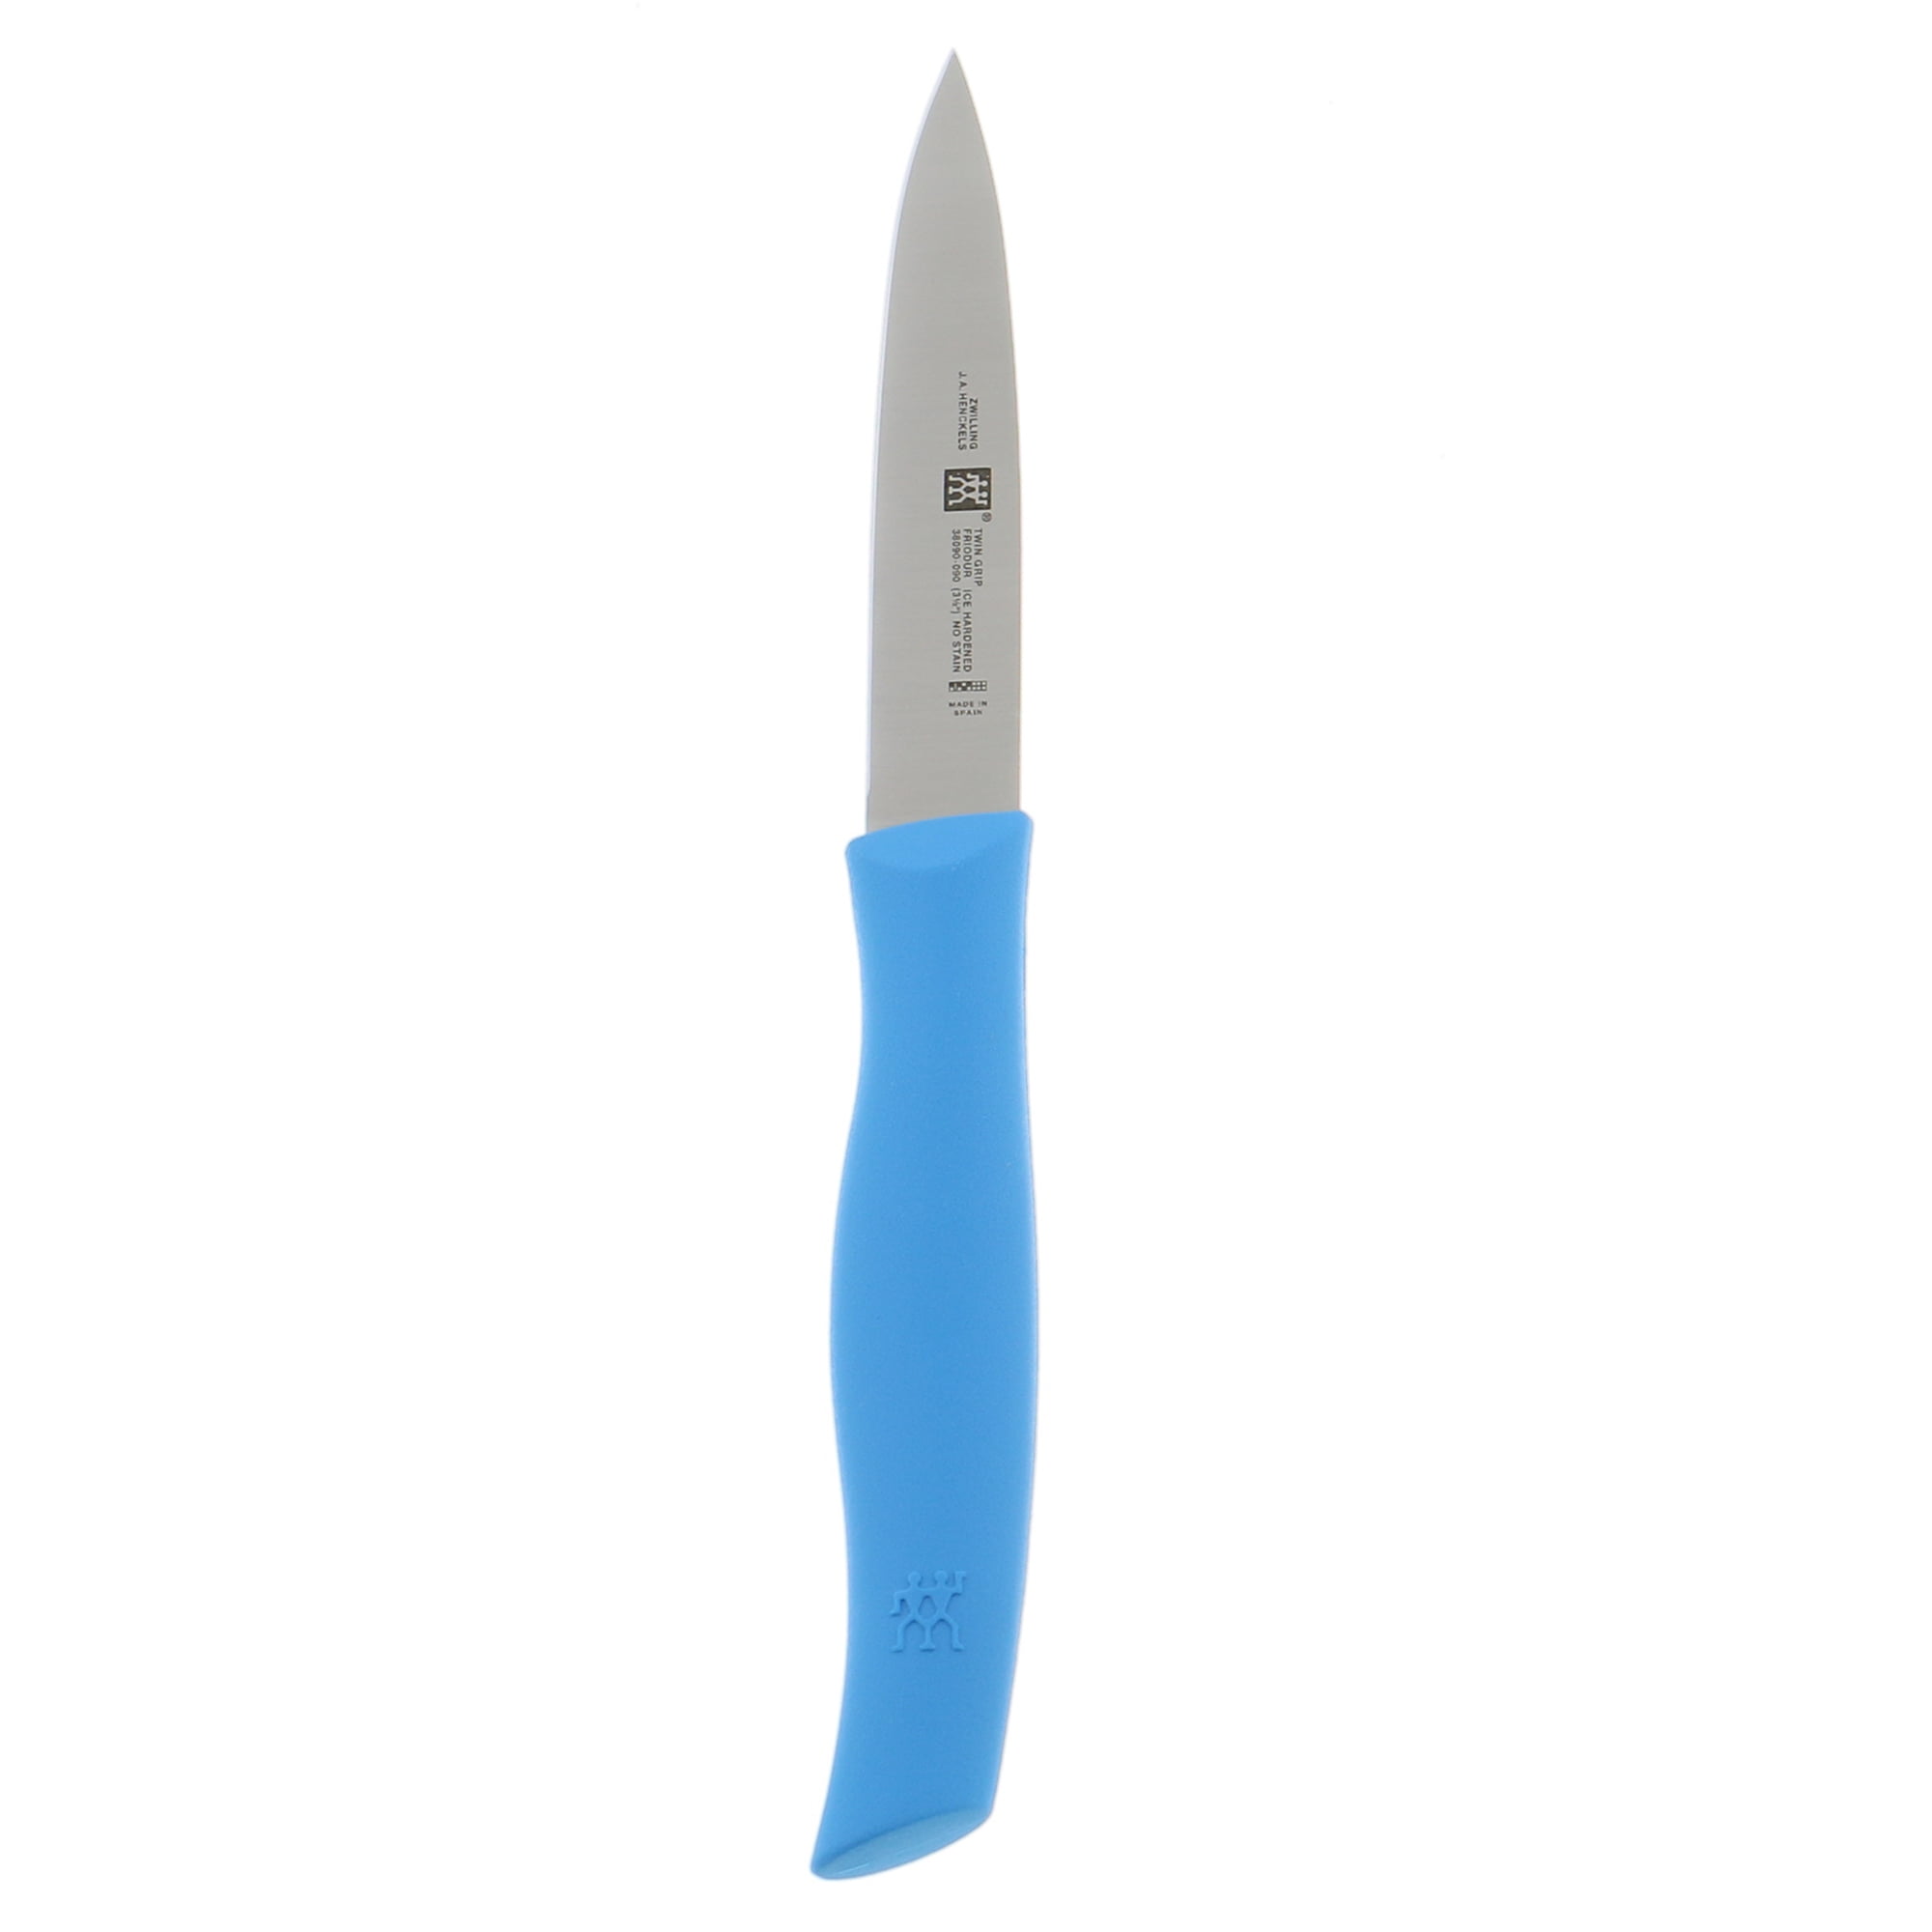 ZWILLING J.A. Henckels Gourmet 3.94-inch Paring Knife & Reviews